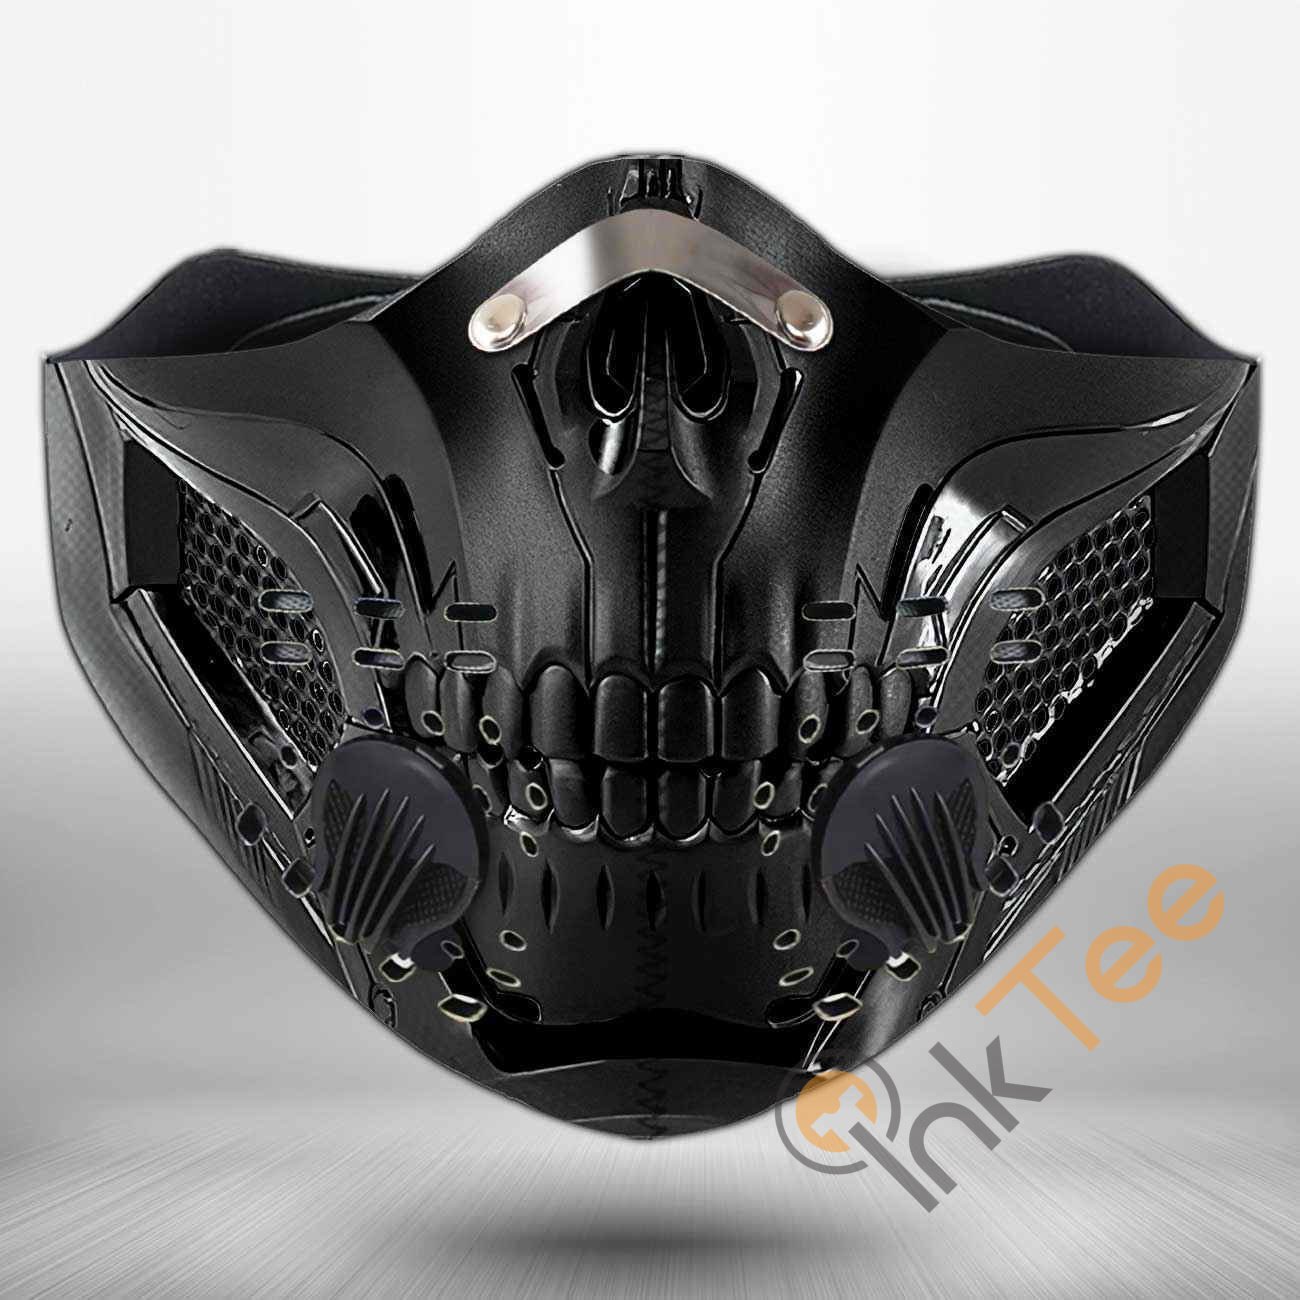 Skull Motorcycle Helmet Filter Activated Carbon Pm 2.5 Fm Sku 2021 Face Mask - InkTee Store